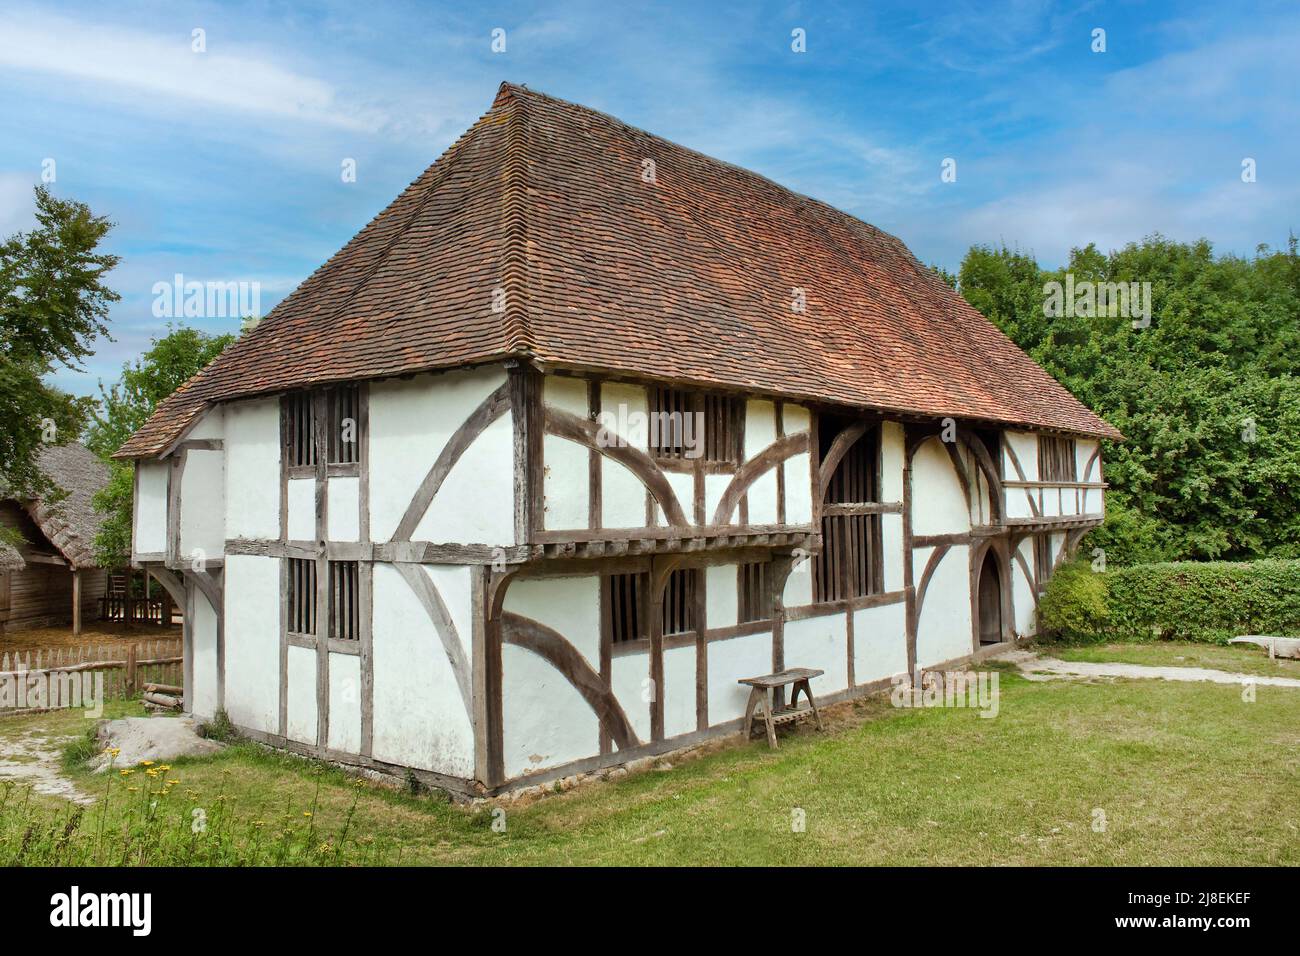 Bayleaf Farmhouse, The Weald and Downland Living Museum (formerly known as the Weald and Downland Open Air Museum until January 2017) is an open-air m Stock Photo